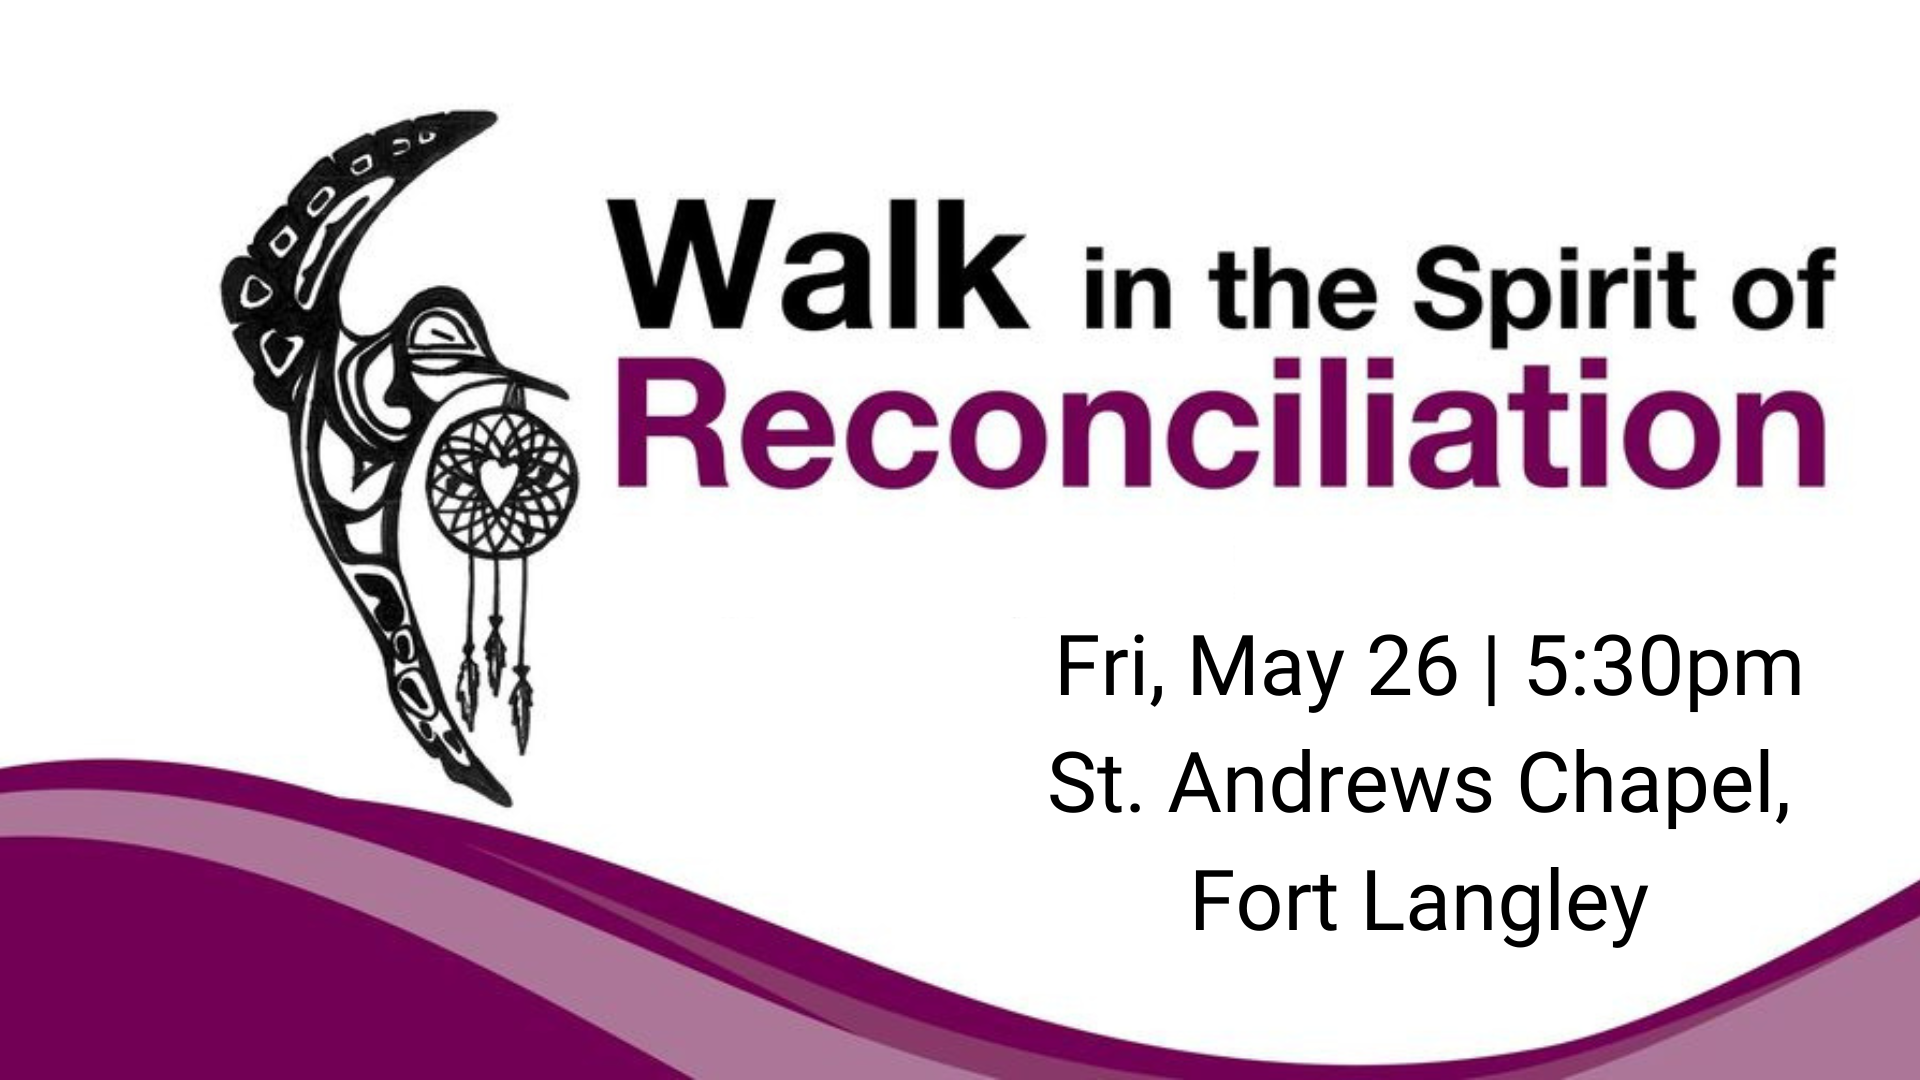 Walk in the Spirit of Reconciliation